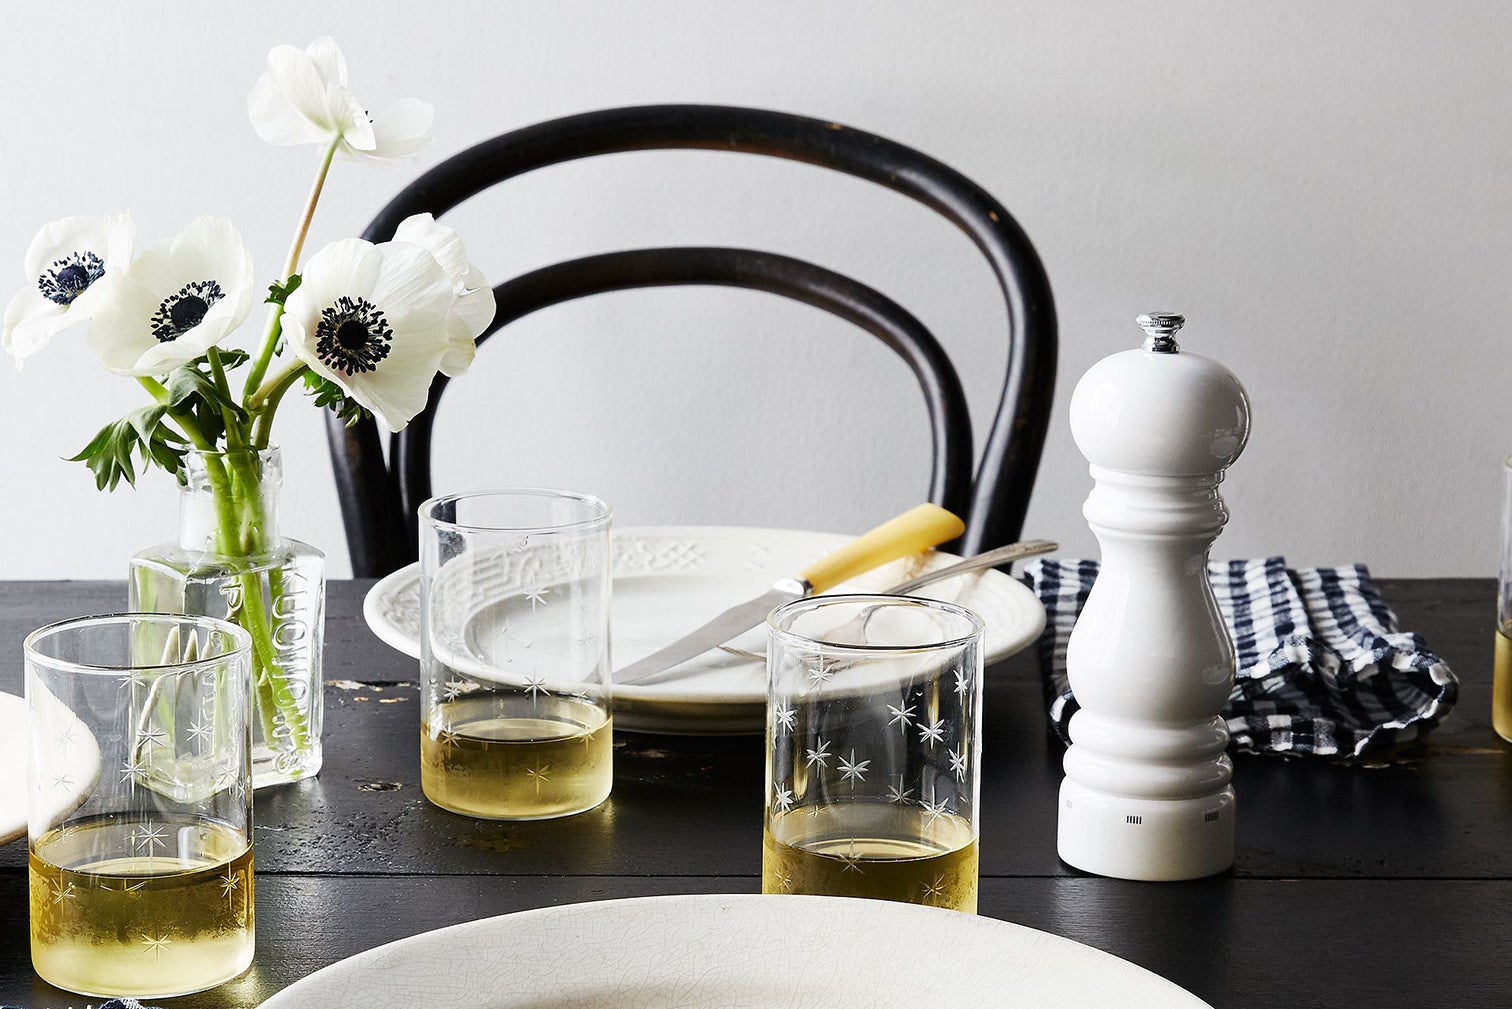 6 Actually Attractive Pepper Mills for the Table